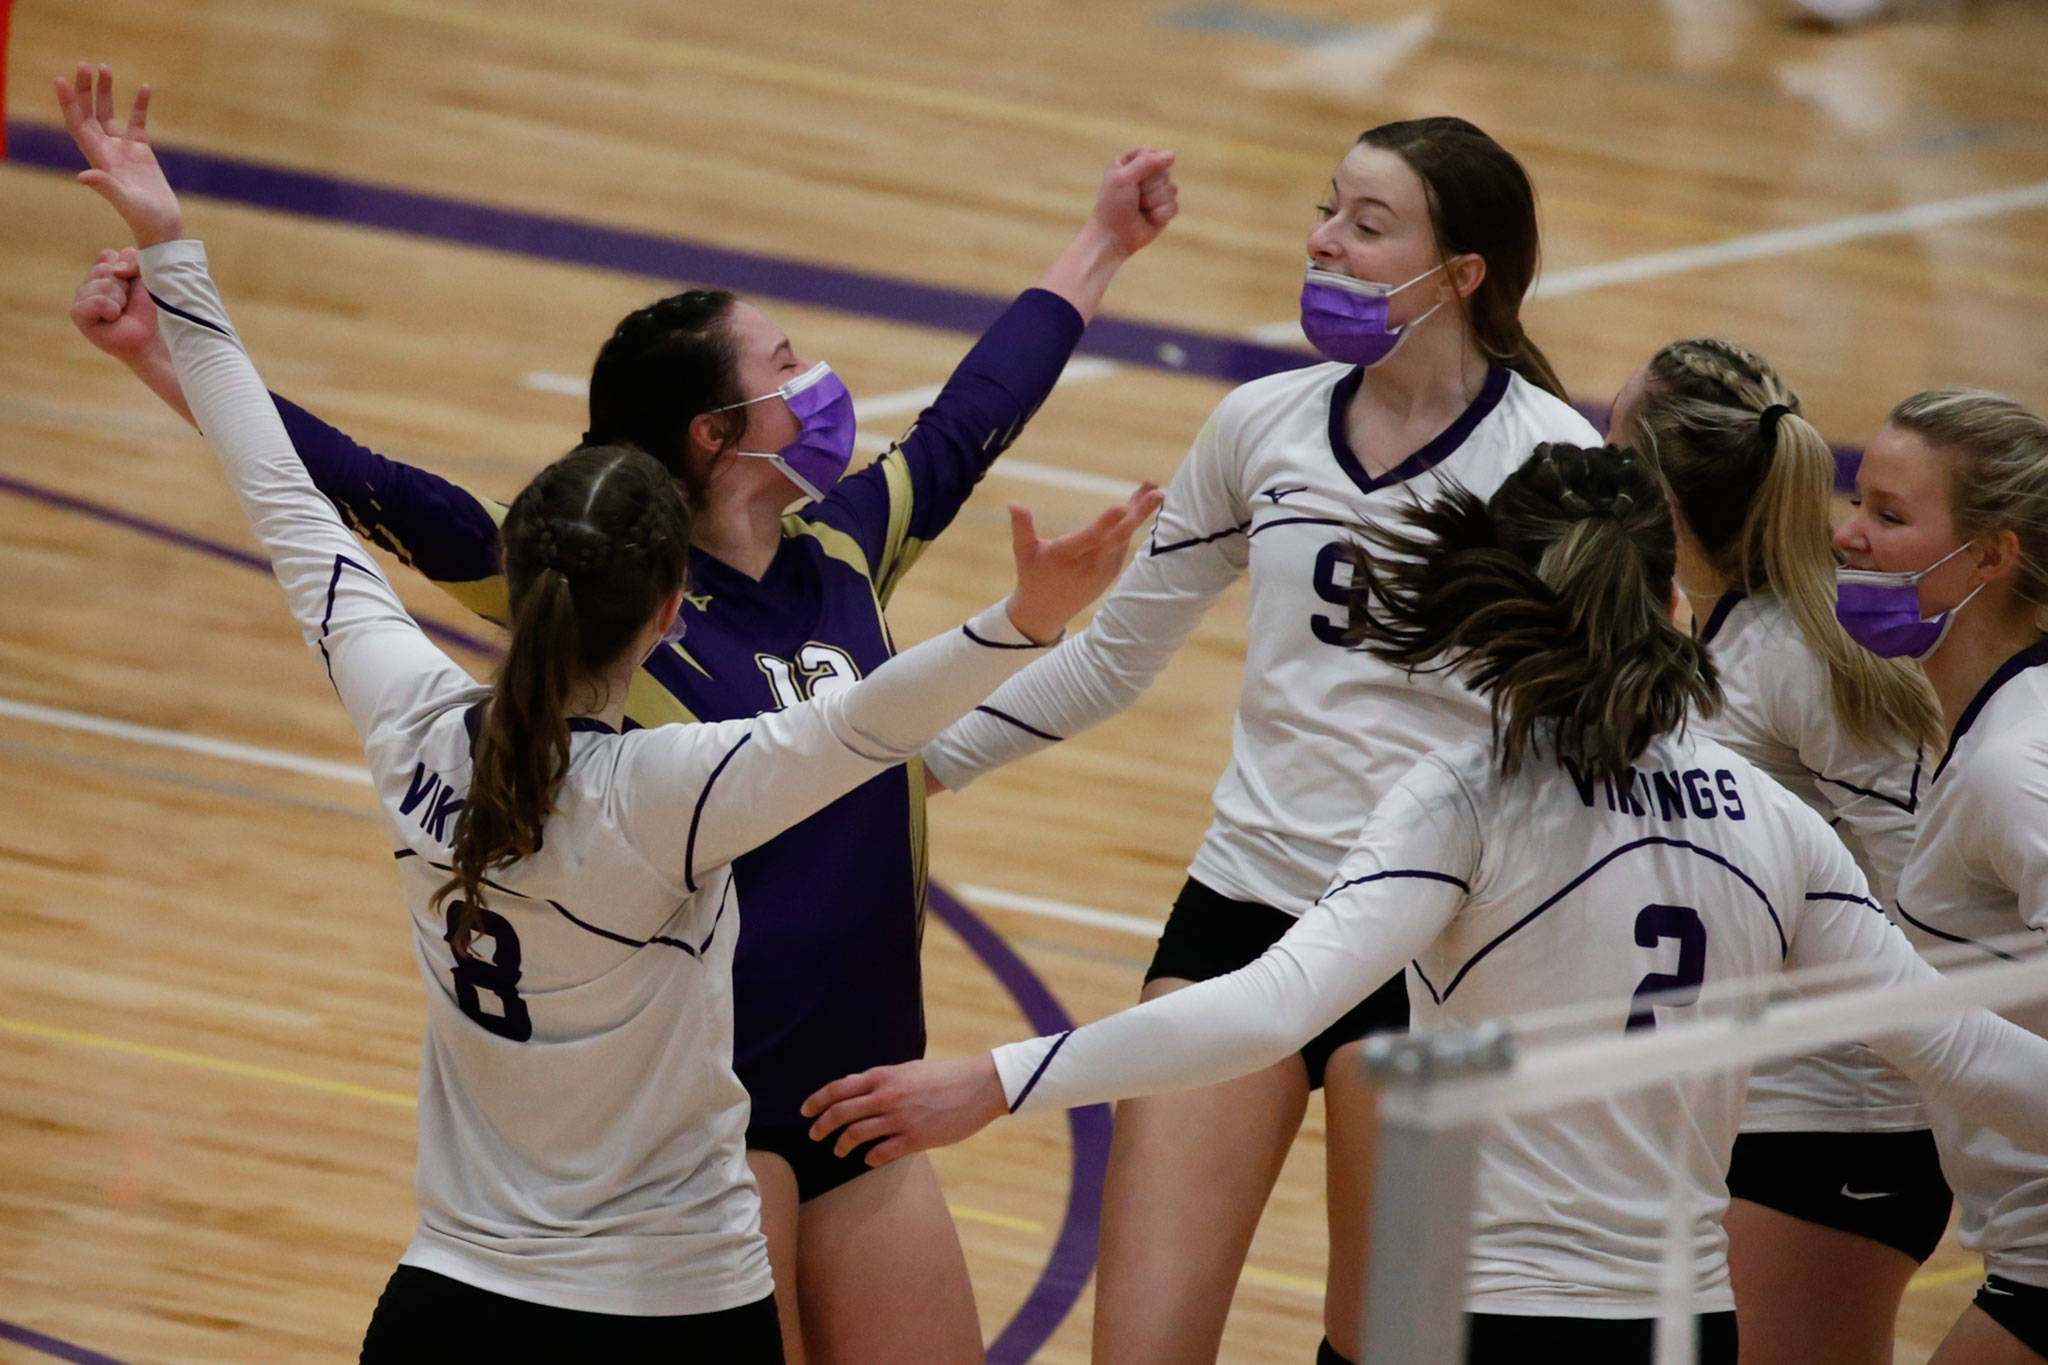 Lake Stevens celebrates during a March 25 match against Snohomish at Lake Stevens High School. (Kevin Clark / The Herald)